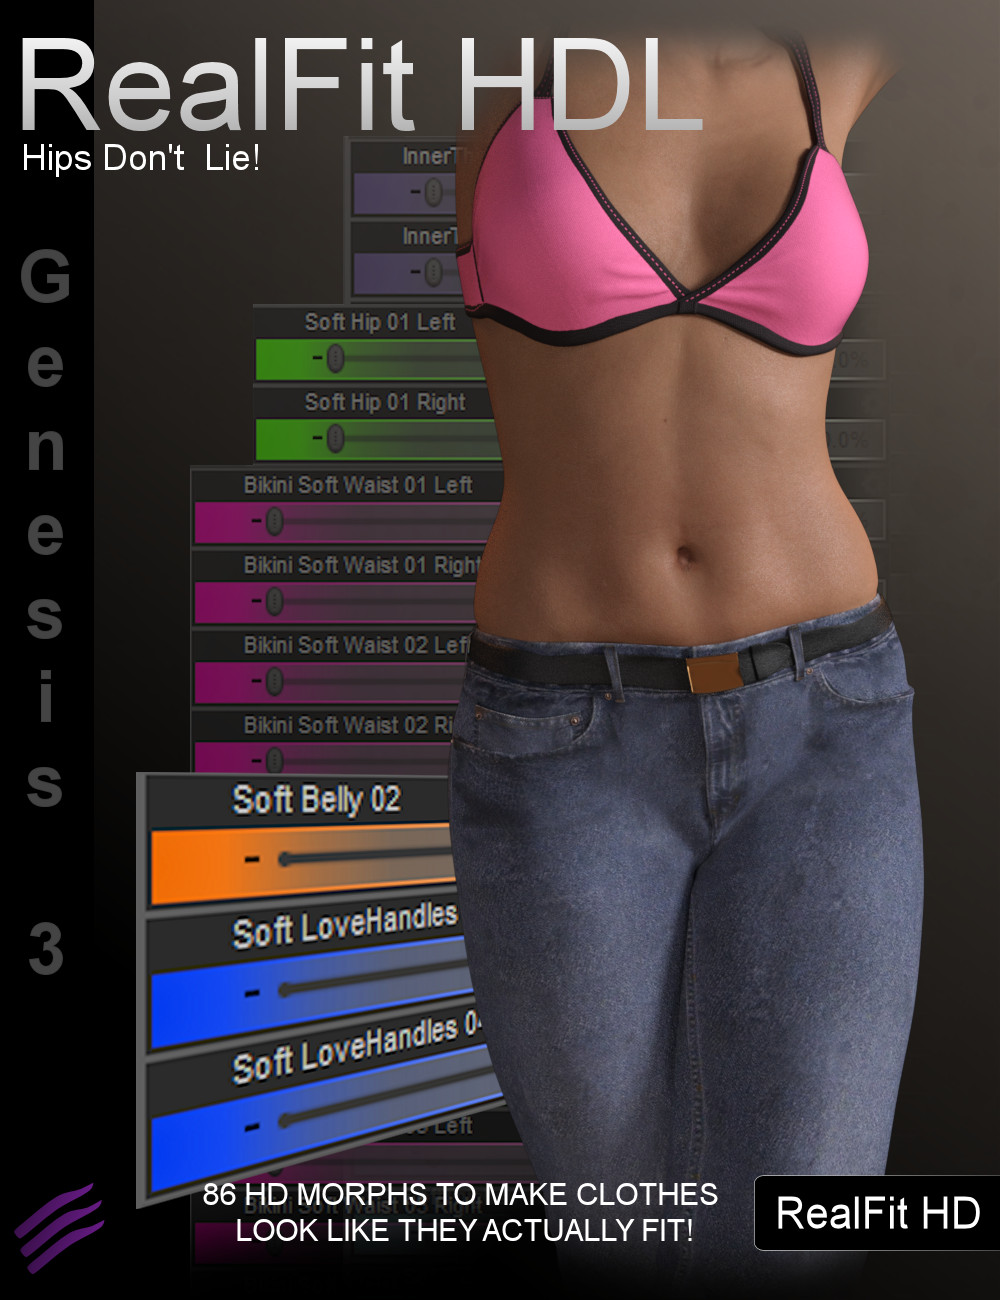 RealFit HDL by: the3dwizard, 3D Models by Daz 3D